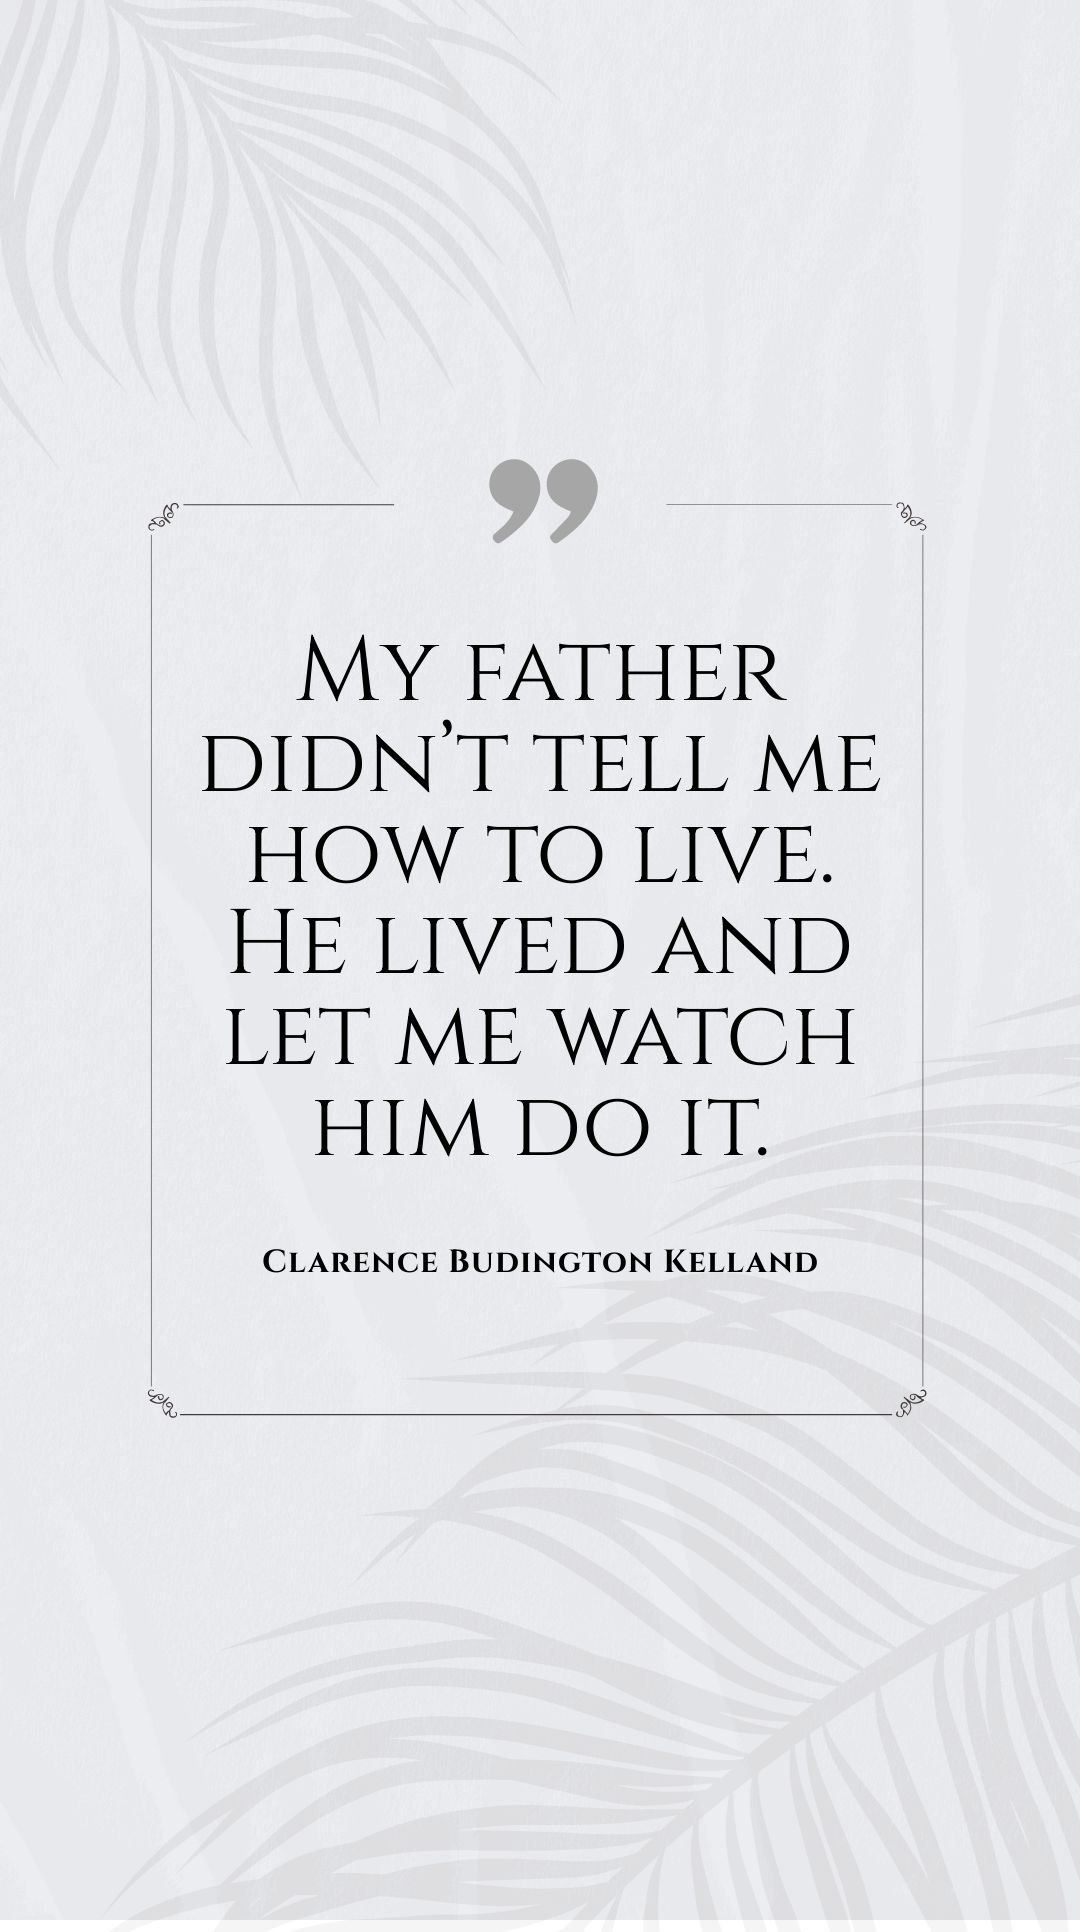 Clarence Budington Kelland - “My father didn’t tell me how to live. He lived and let me watch him do it.” in JPG